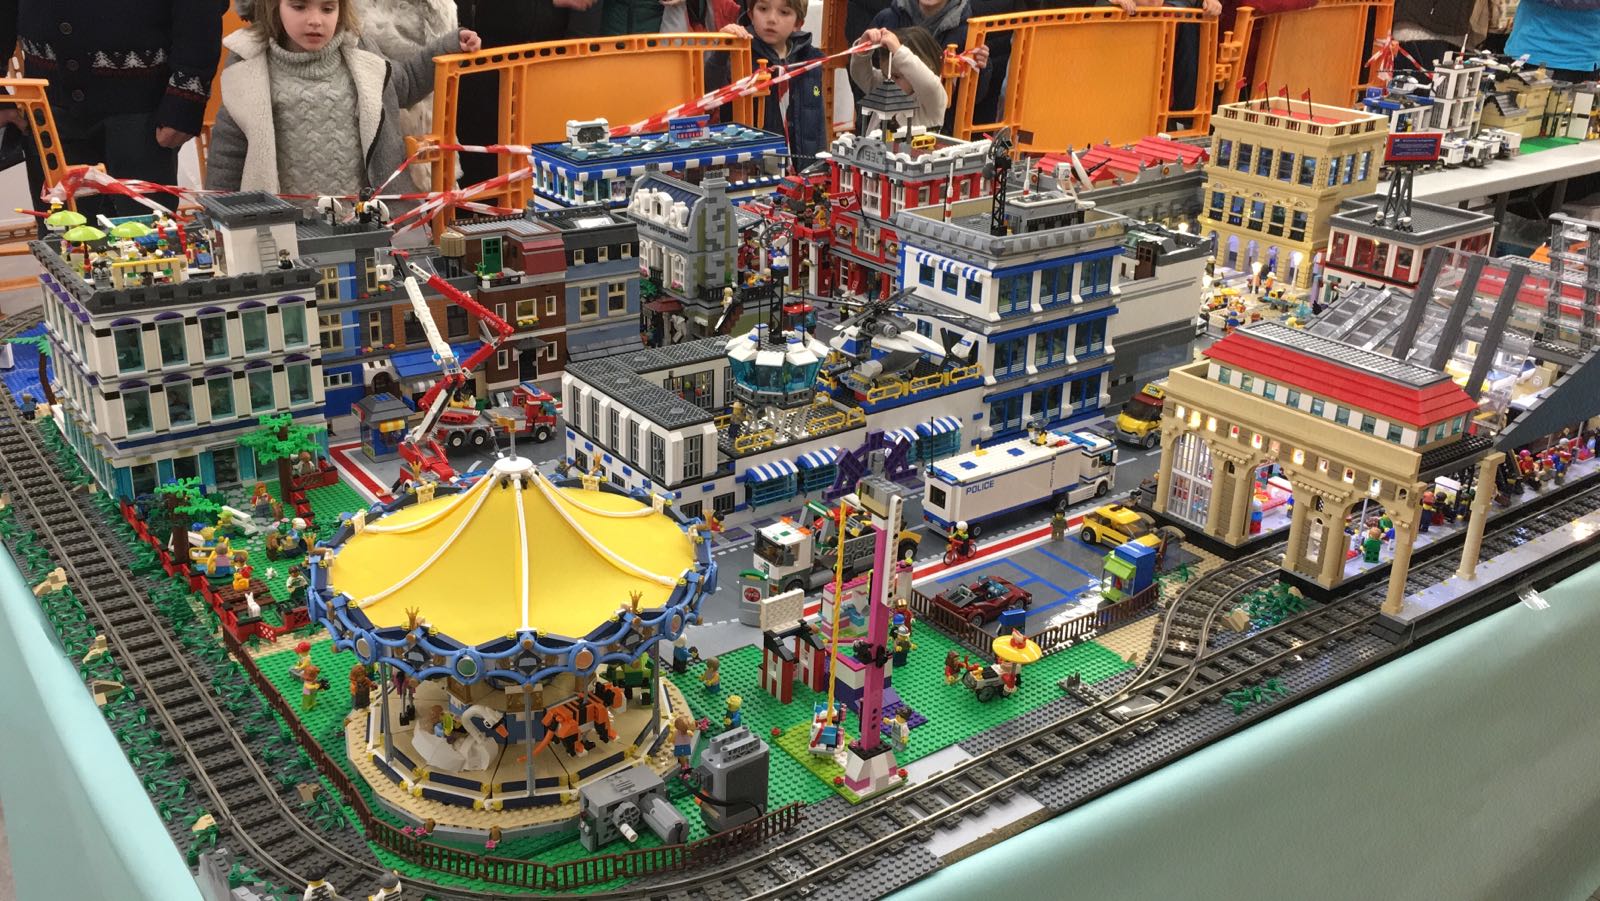 FIRST EXHIBITION OF LEGO TRAINS IN THE MARINA ALTA